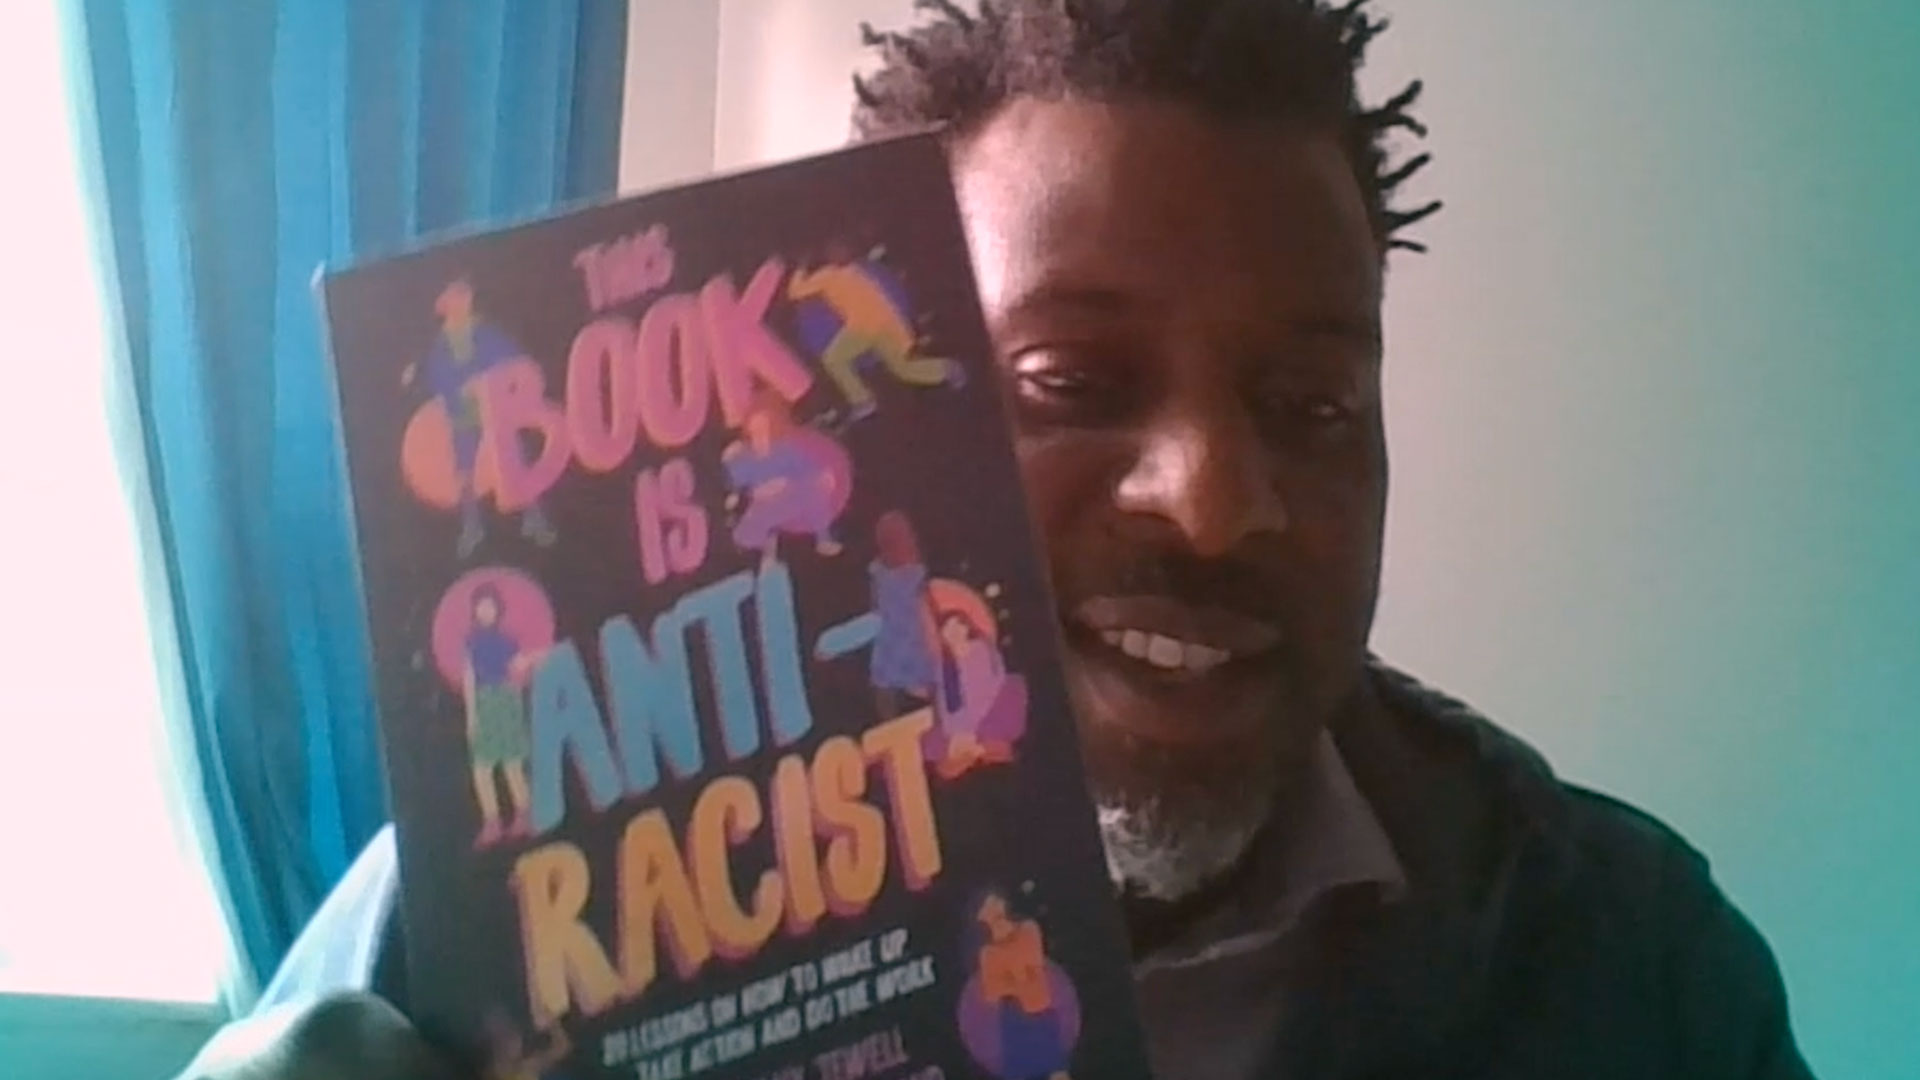 Stuart Lawrence holding one of his recommended books about racism